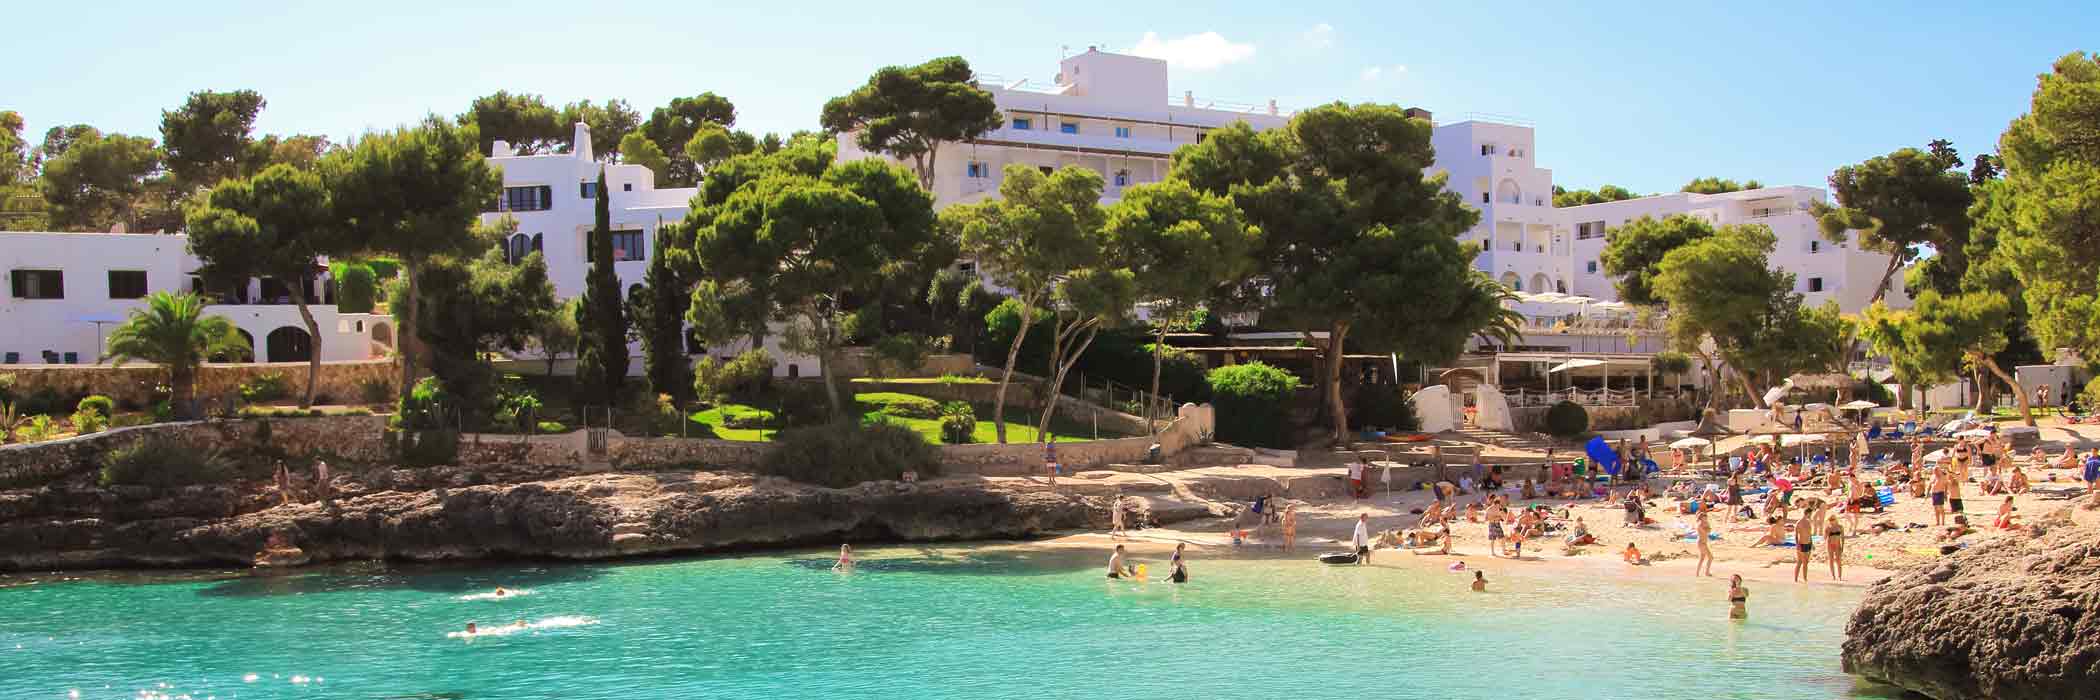 Best Self Catering Accommodation In Majorca